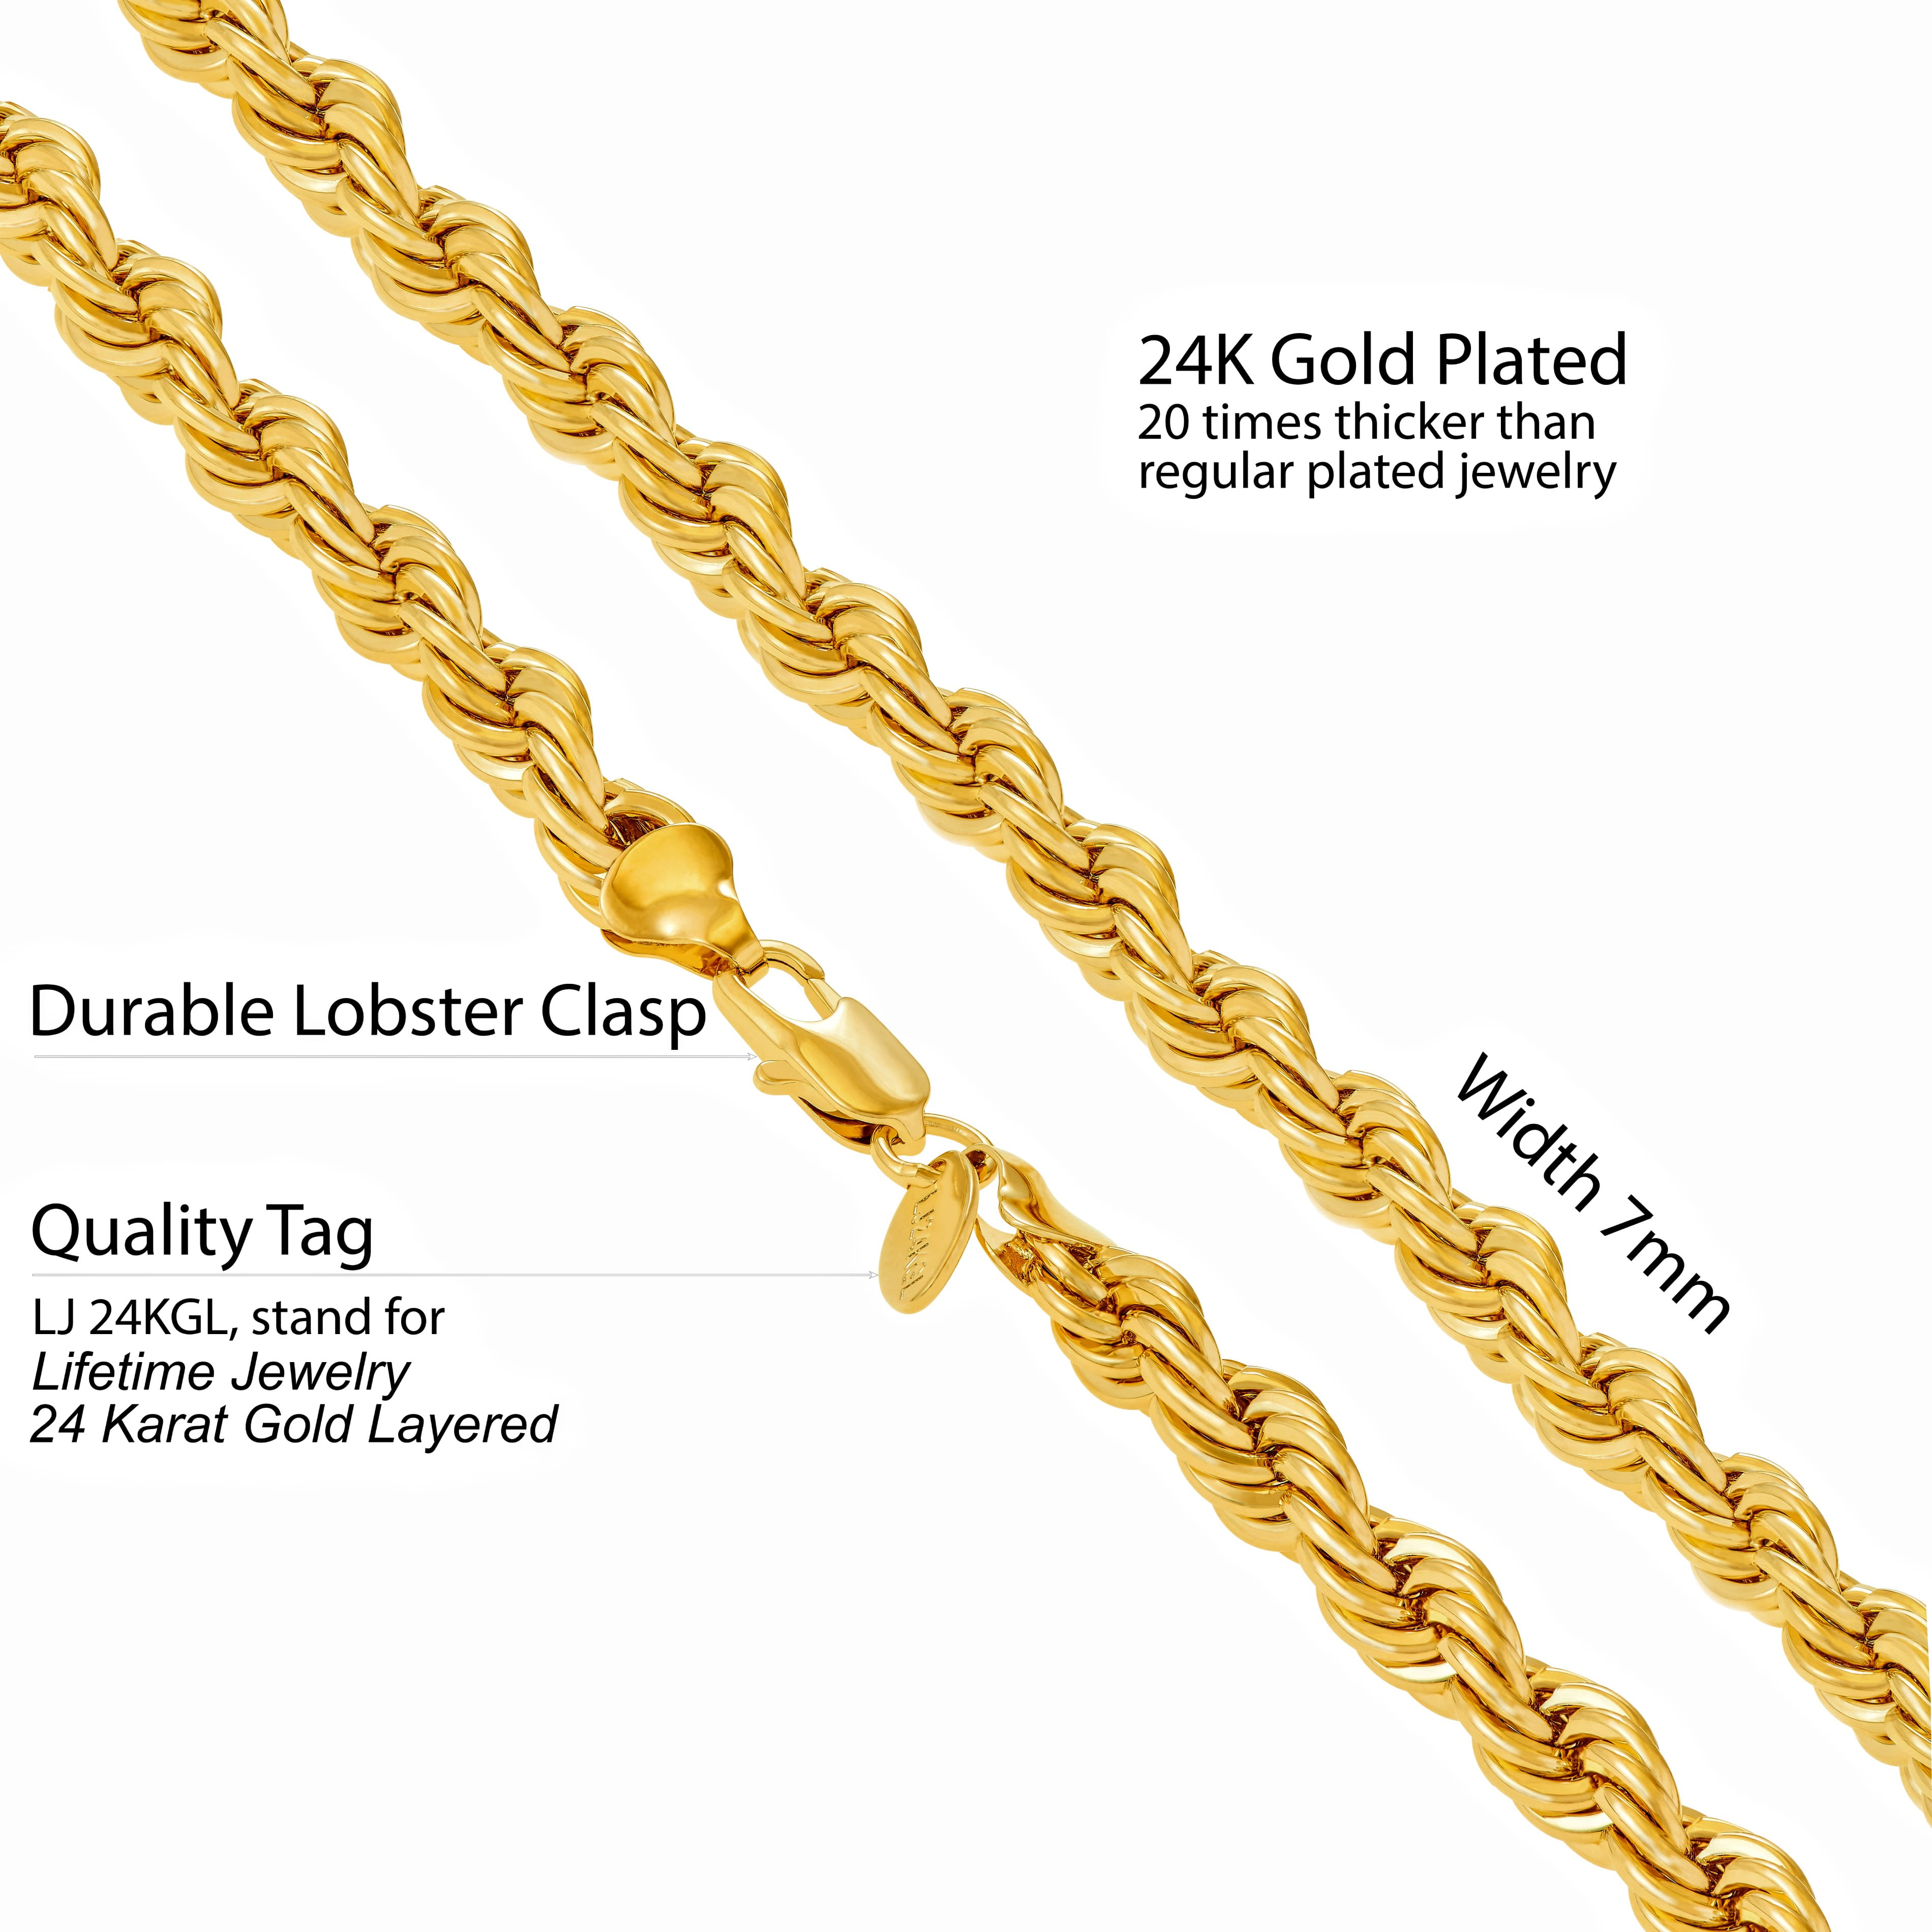 LIFETIME JEWELRY 7mm Rope Chain Necklace 24k Real Gold Plated